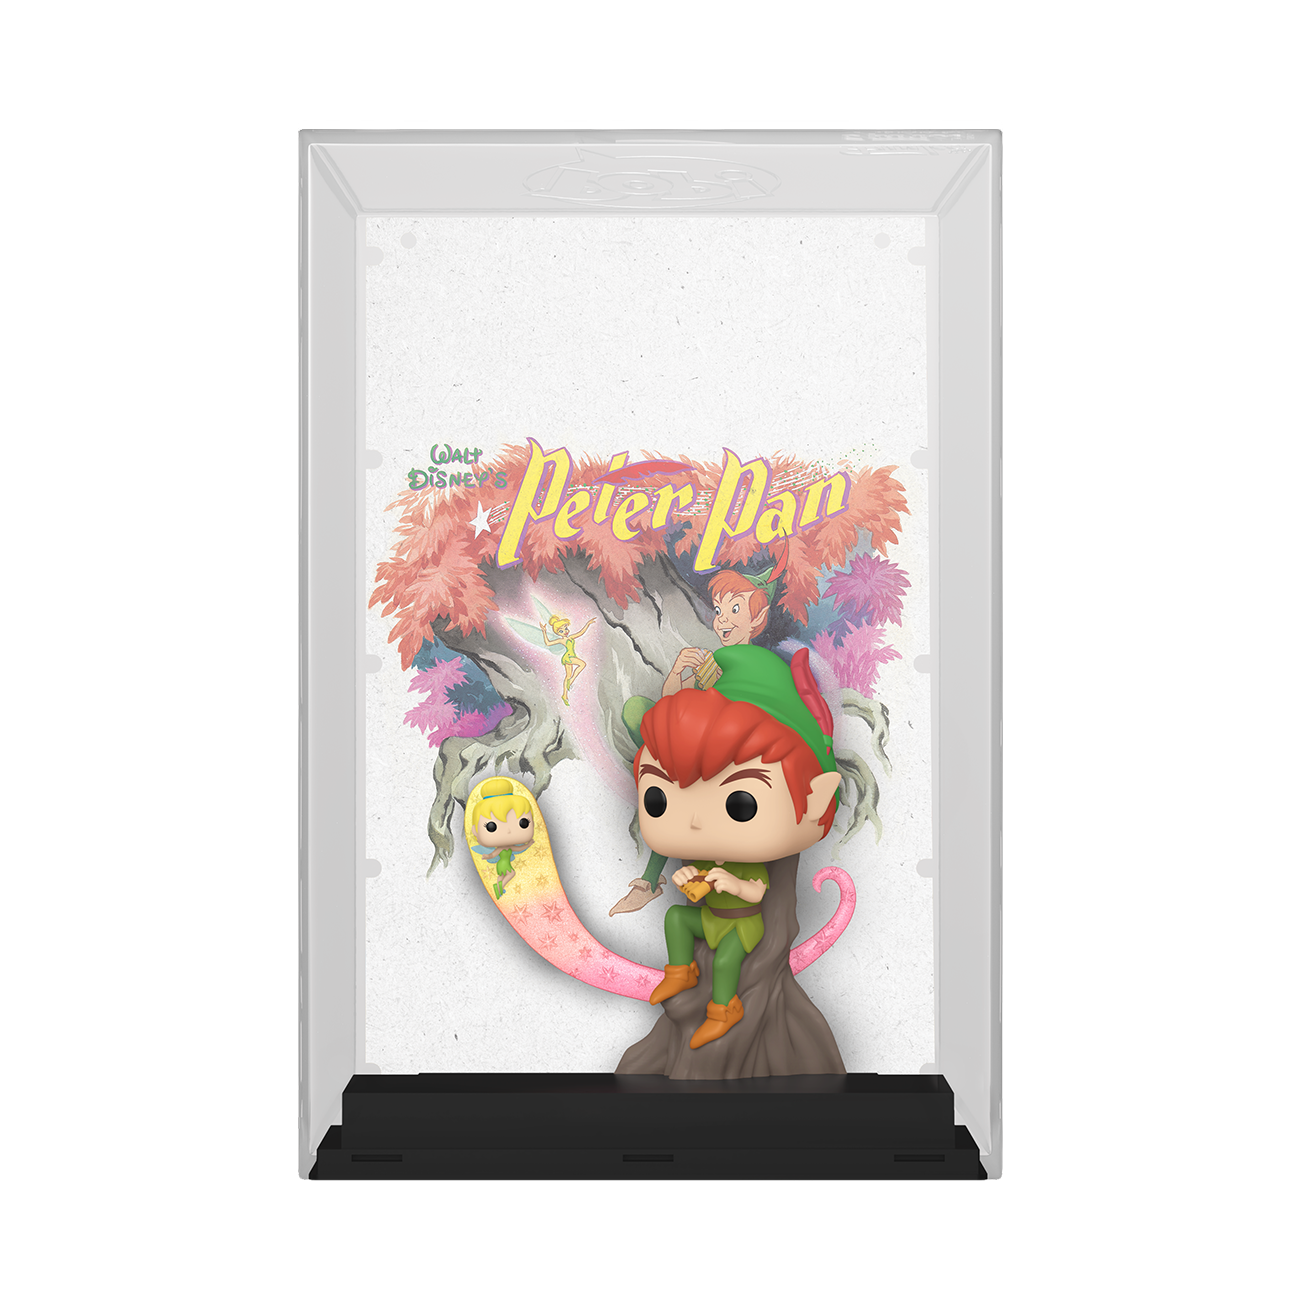 Funko POP! Movie Poster: Disney 100th Peter Pan and Tinker Bell Vinyl Figure Set with Poster